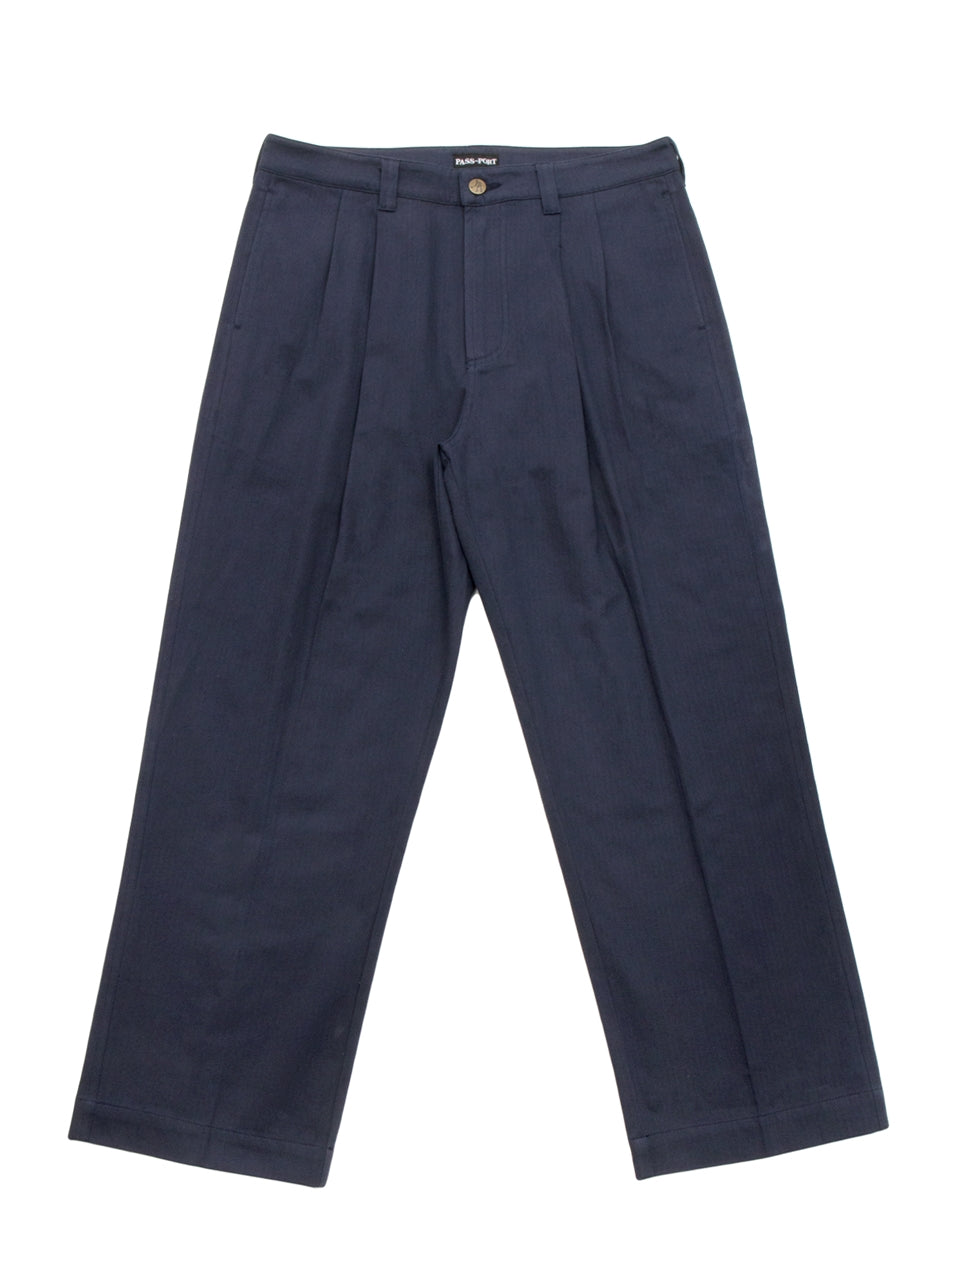 PASSPORT Leagues Club Pant - Navy – Sk8Station